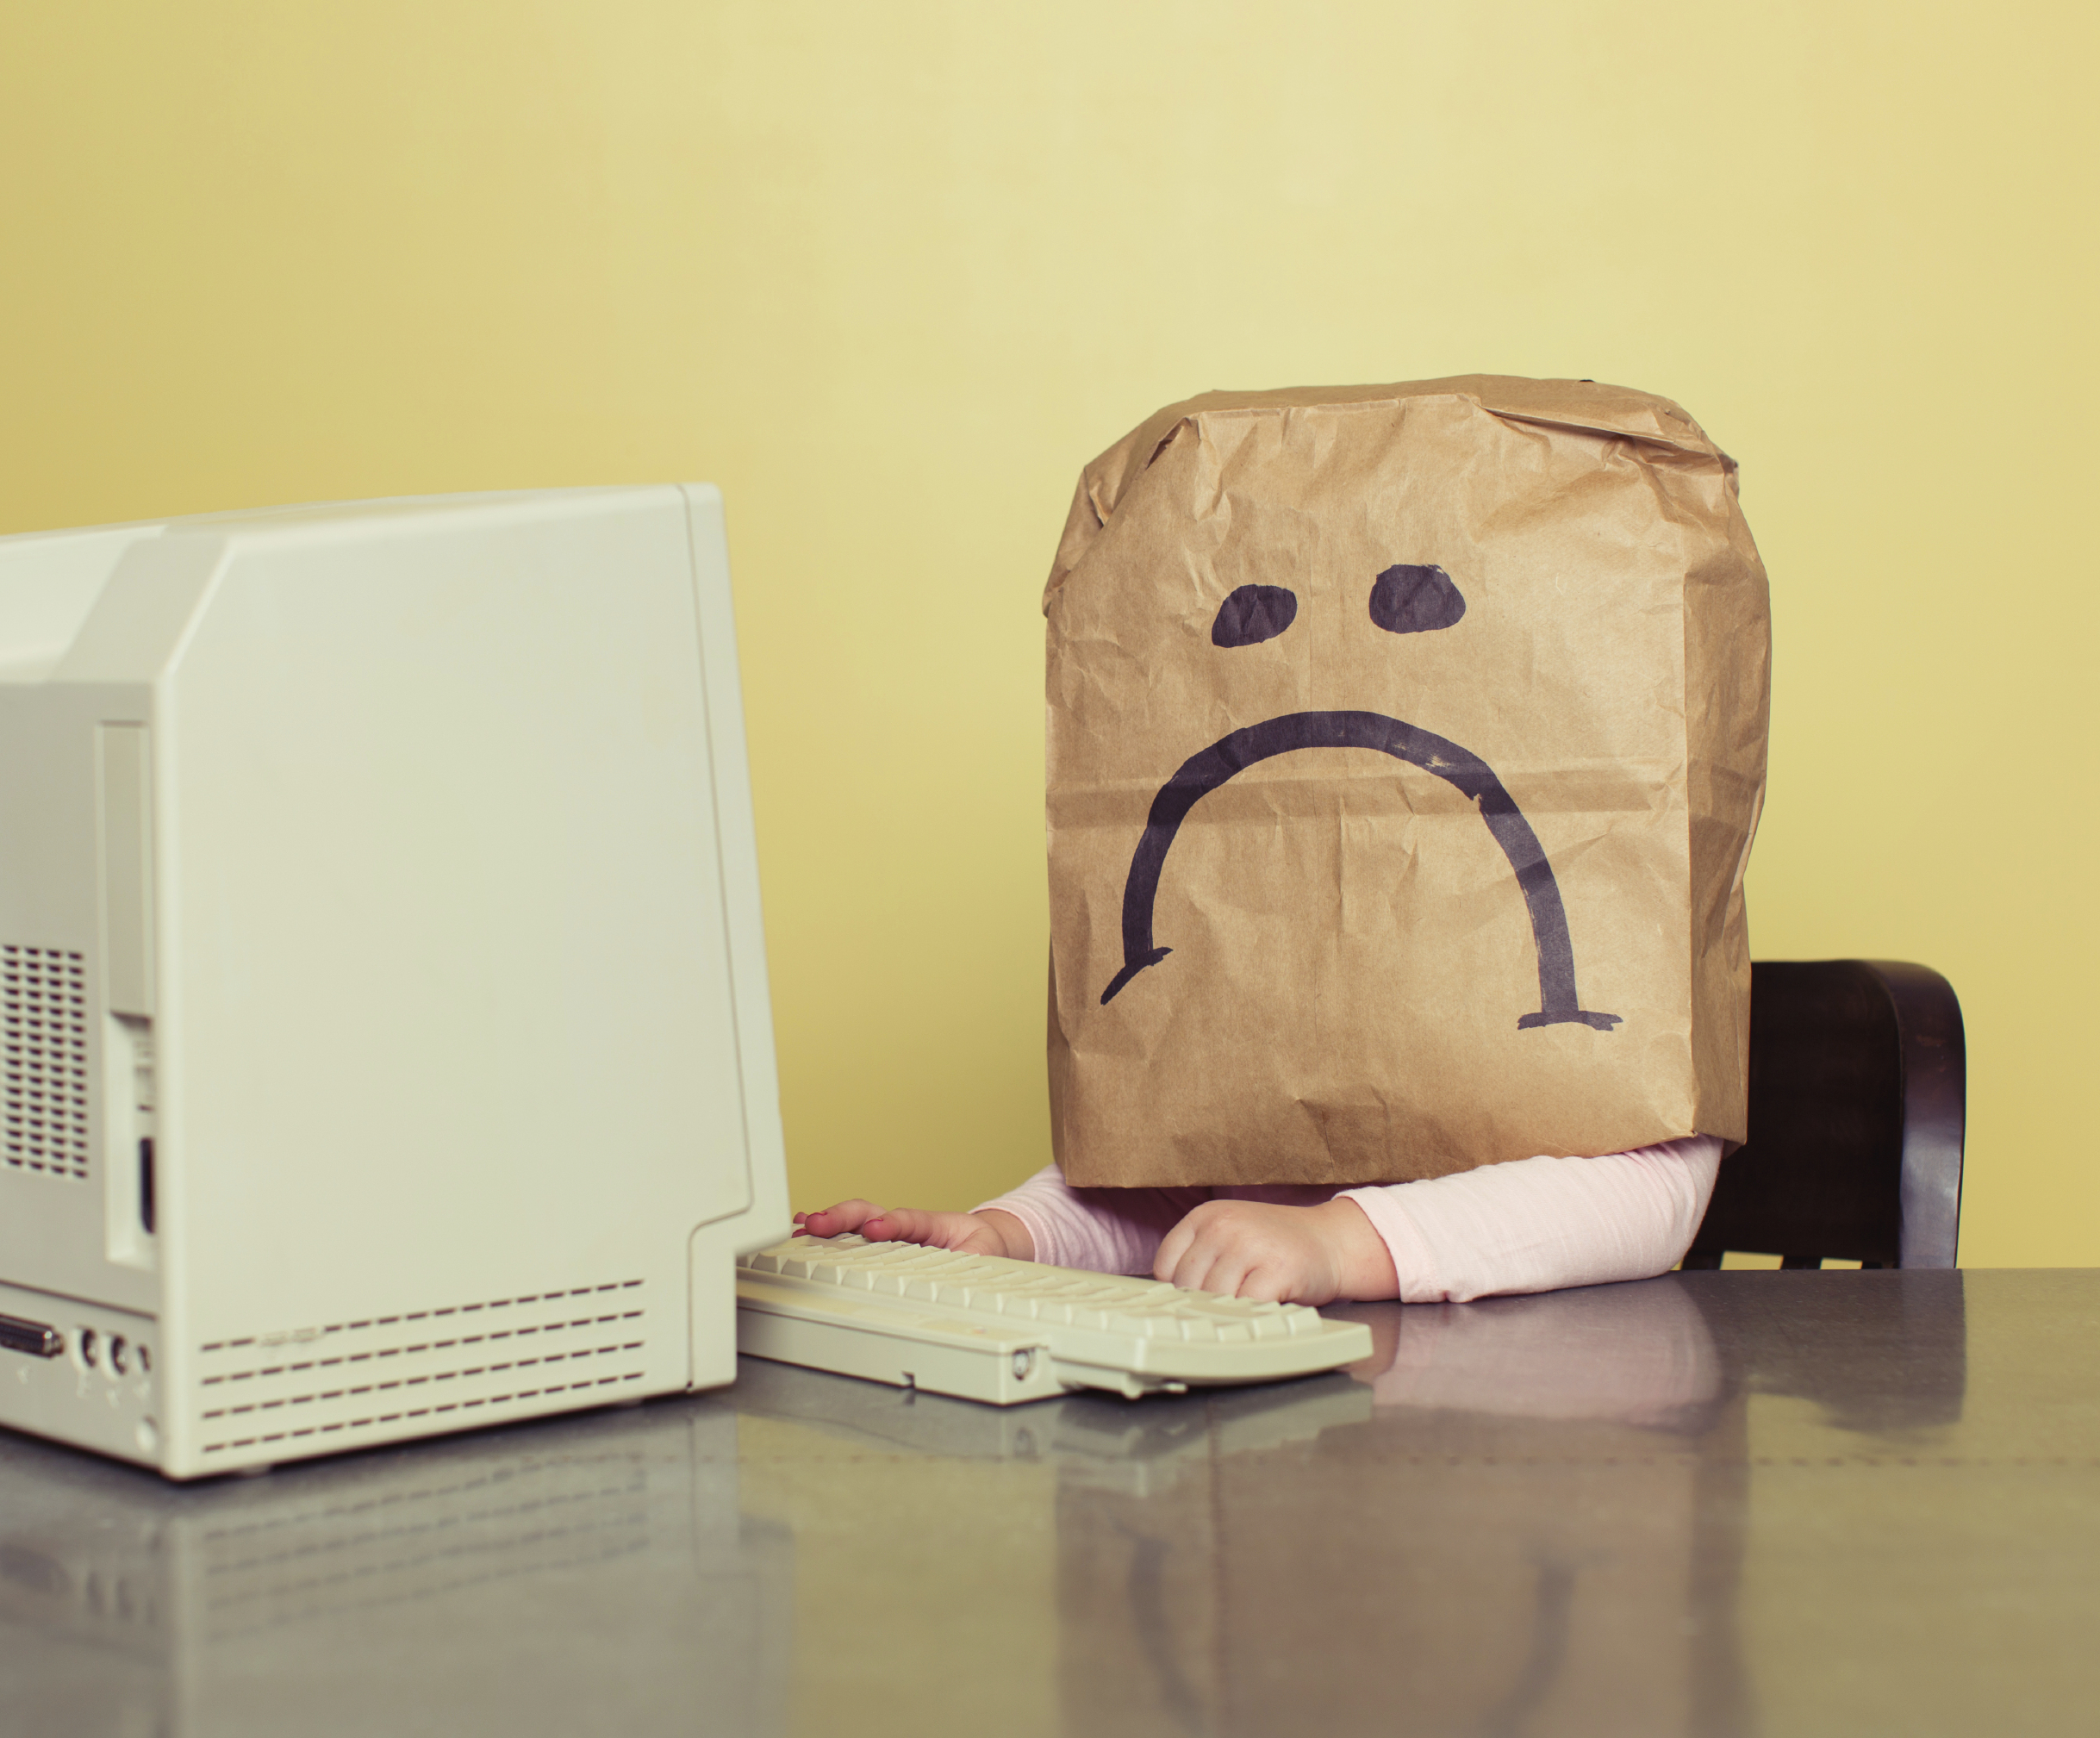 5 Reasons Your CRM Is Awful